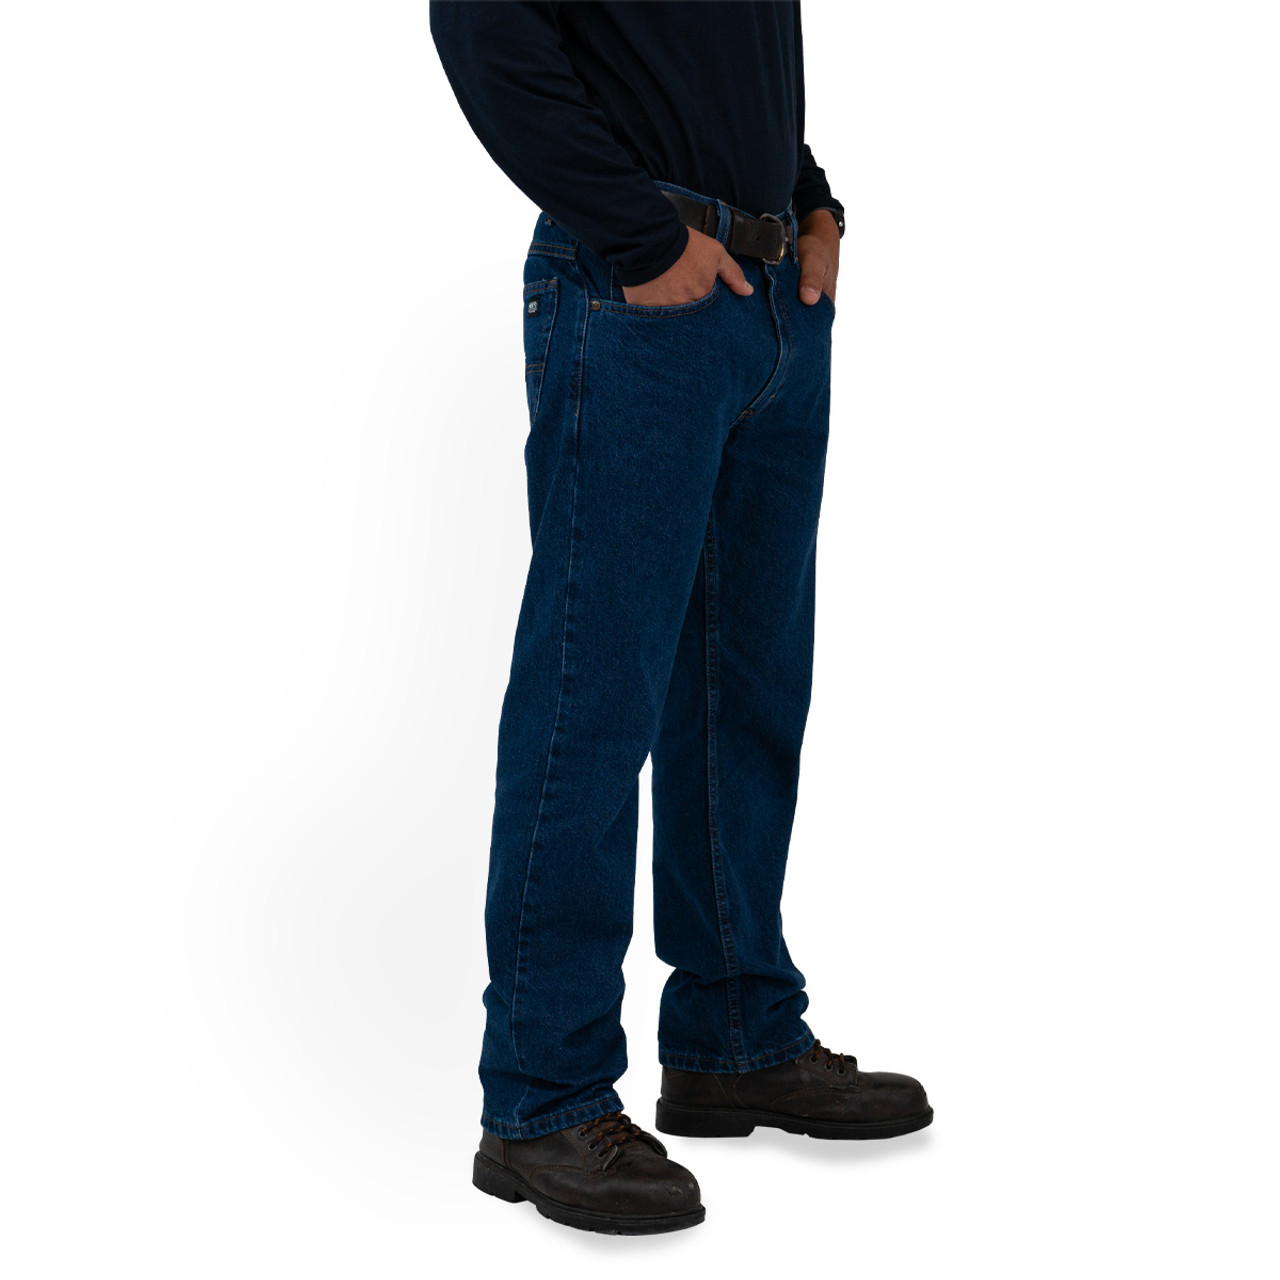 Jeans Men for Relaxed KEY Fit - Apparel